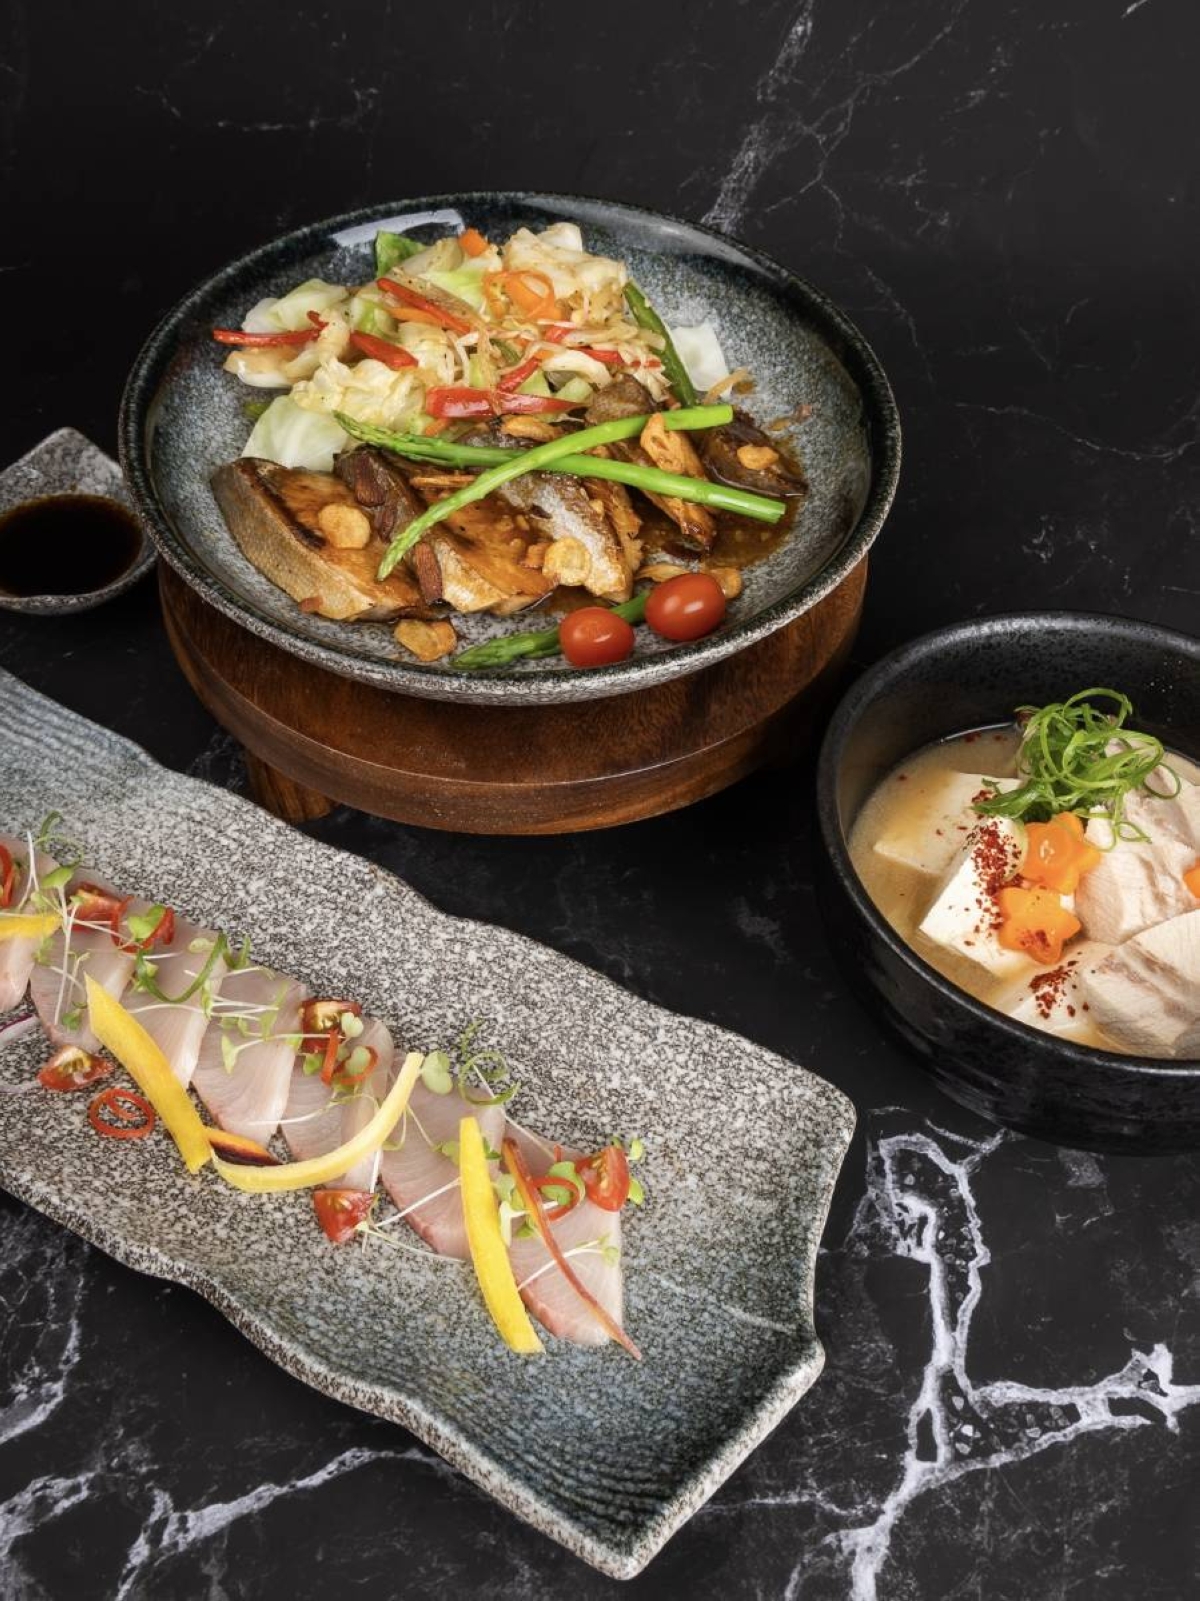 Japanese-Korean restaurant Ginzadon crafts three meat-free dishes from one core ingredient: hamachi (yellowtail fish). 